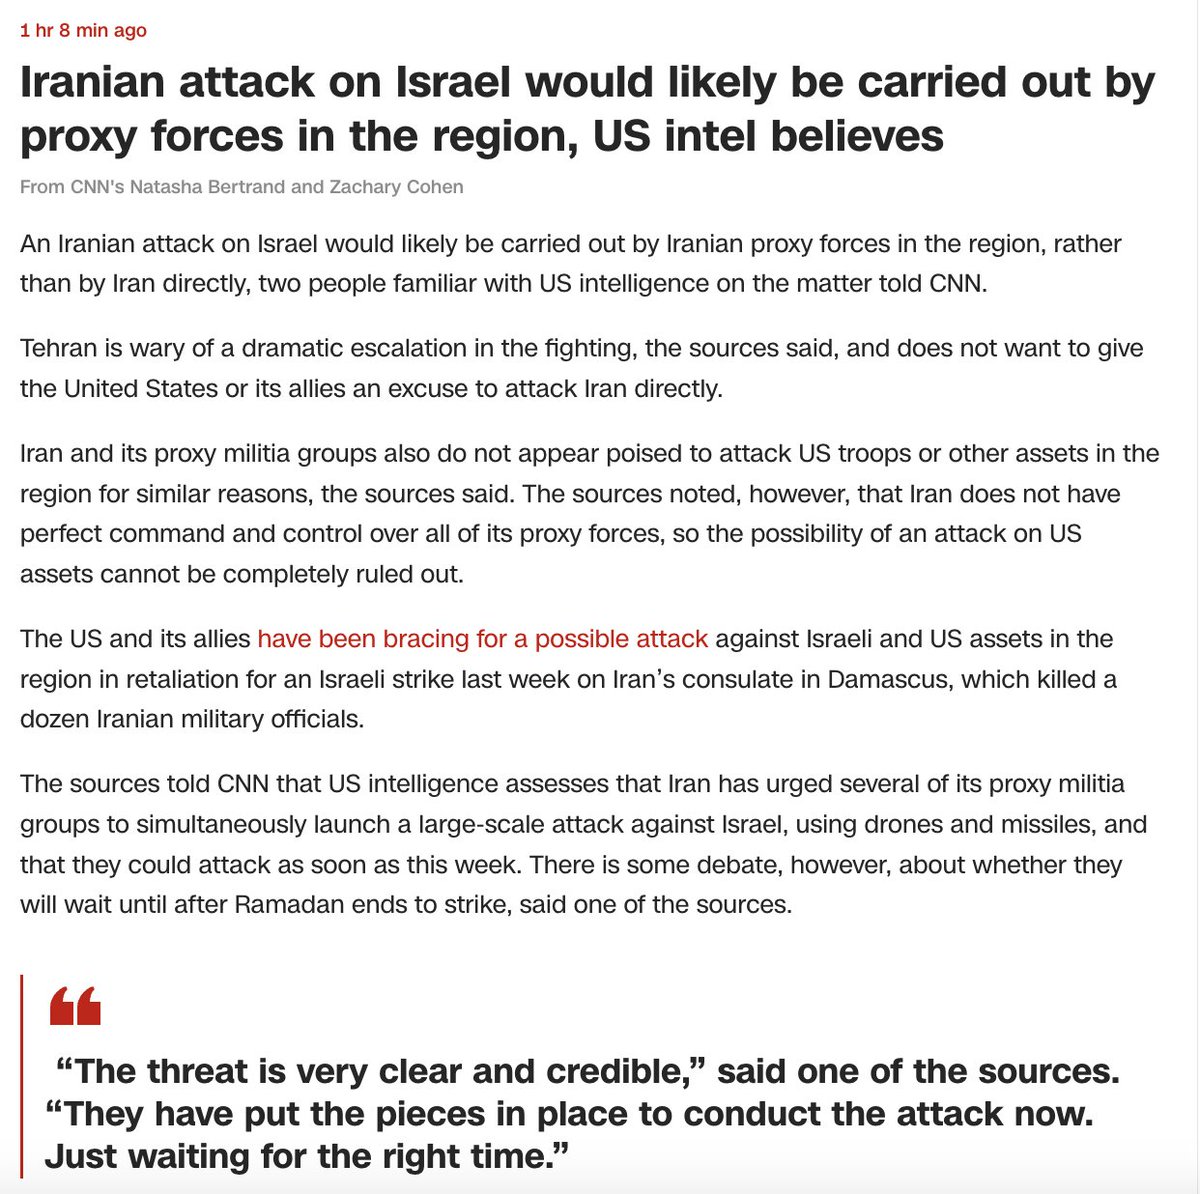 CNN reports that U.S. intelligence assesses that Iran has urged several of its proxy militia groups to simultaneously launch a large-scale attack against Israel, using drones and missiles, and that they could attack as soon as this week.